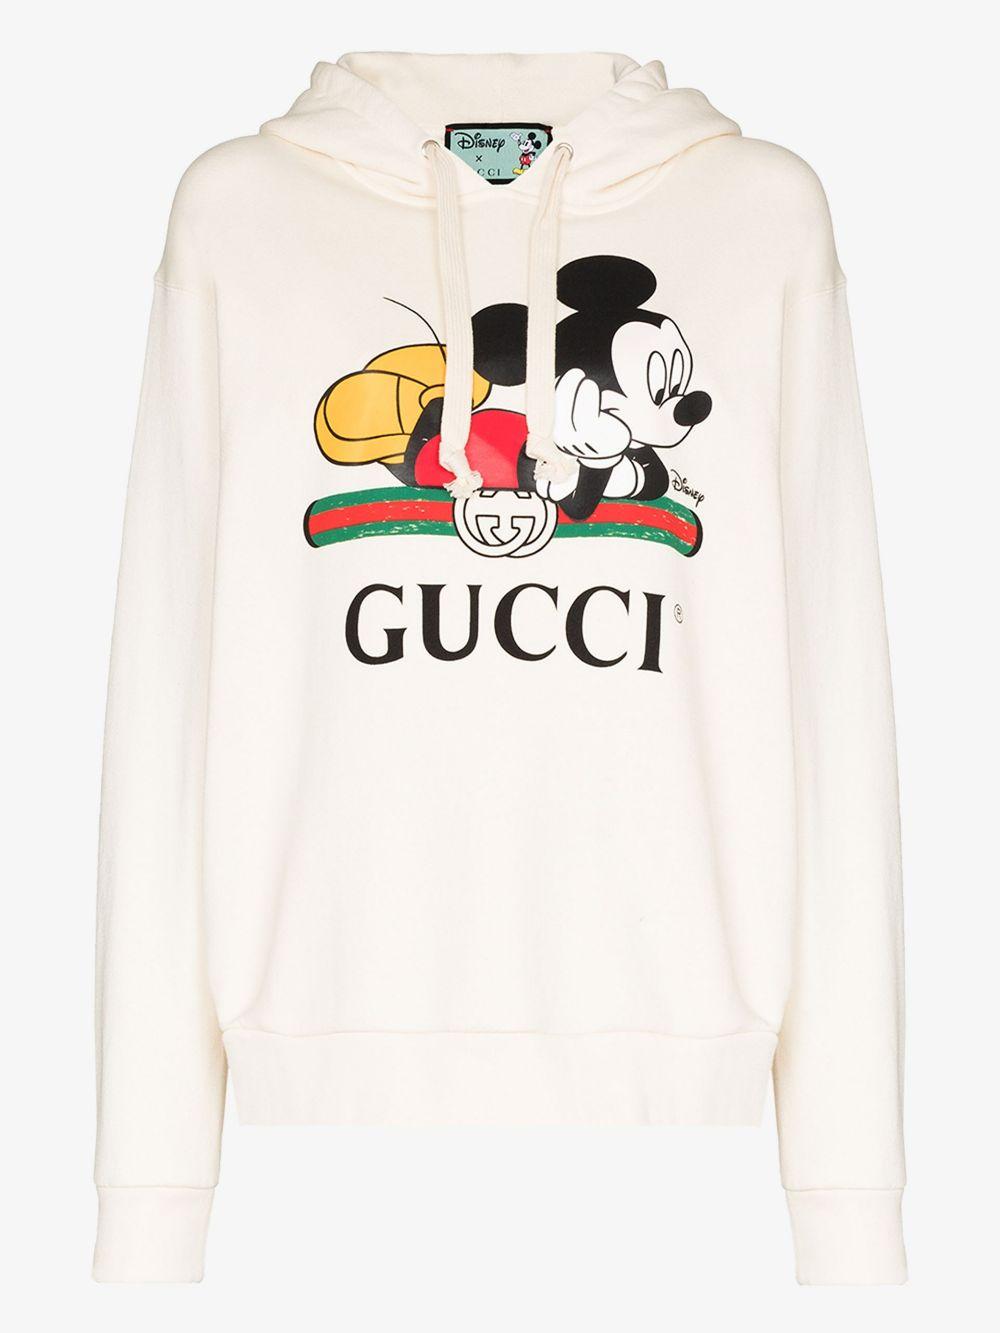 Logo Gucci X Mickey Mouse And Minnie Mouse shirt, hoodie, sweater